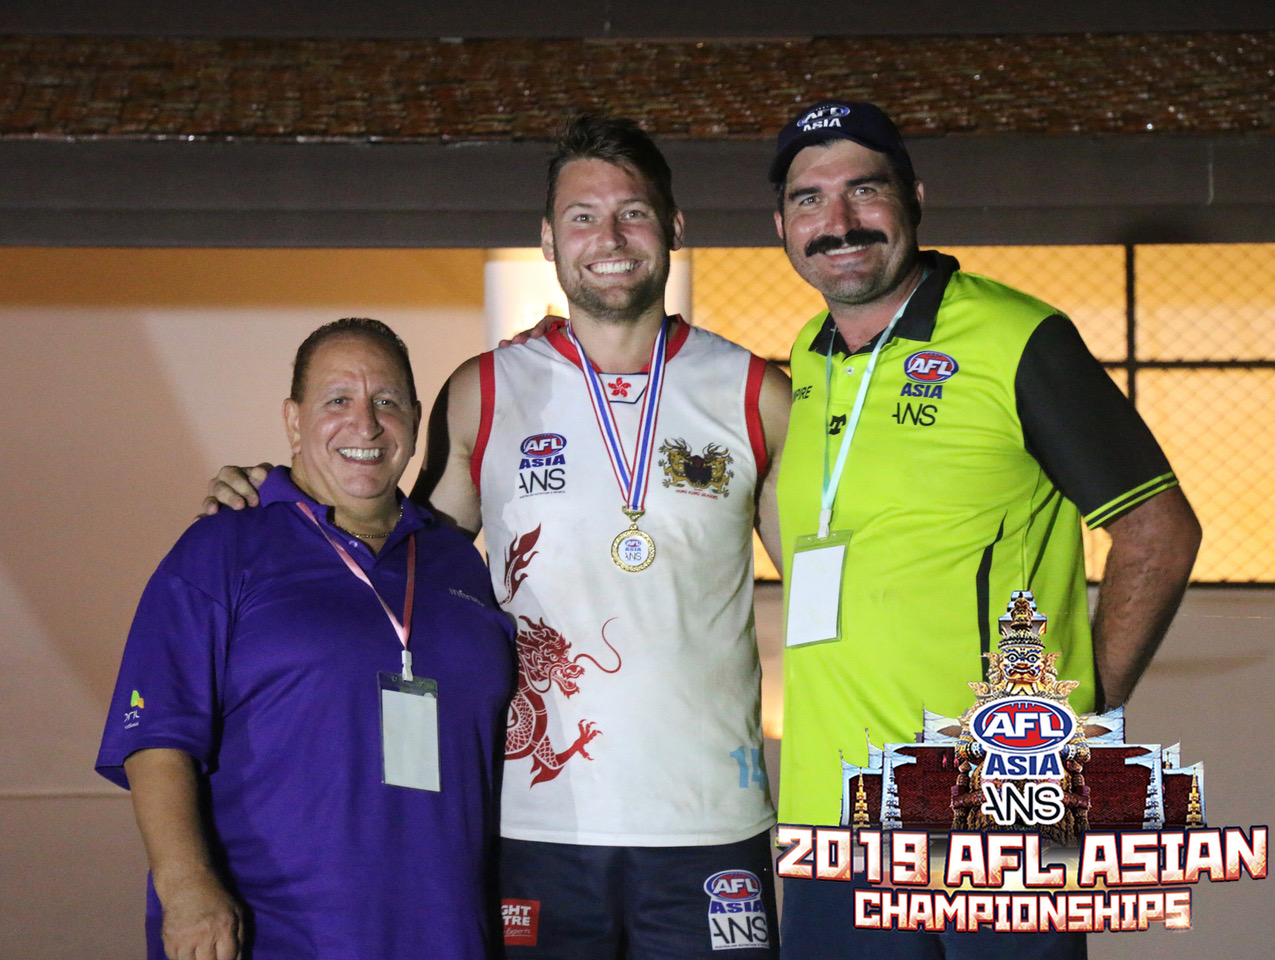 Sam Agar Player of the 2019 AFL Asian Championships